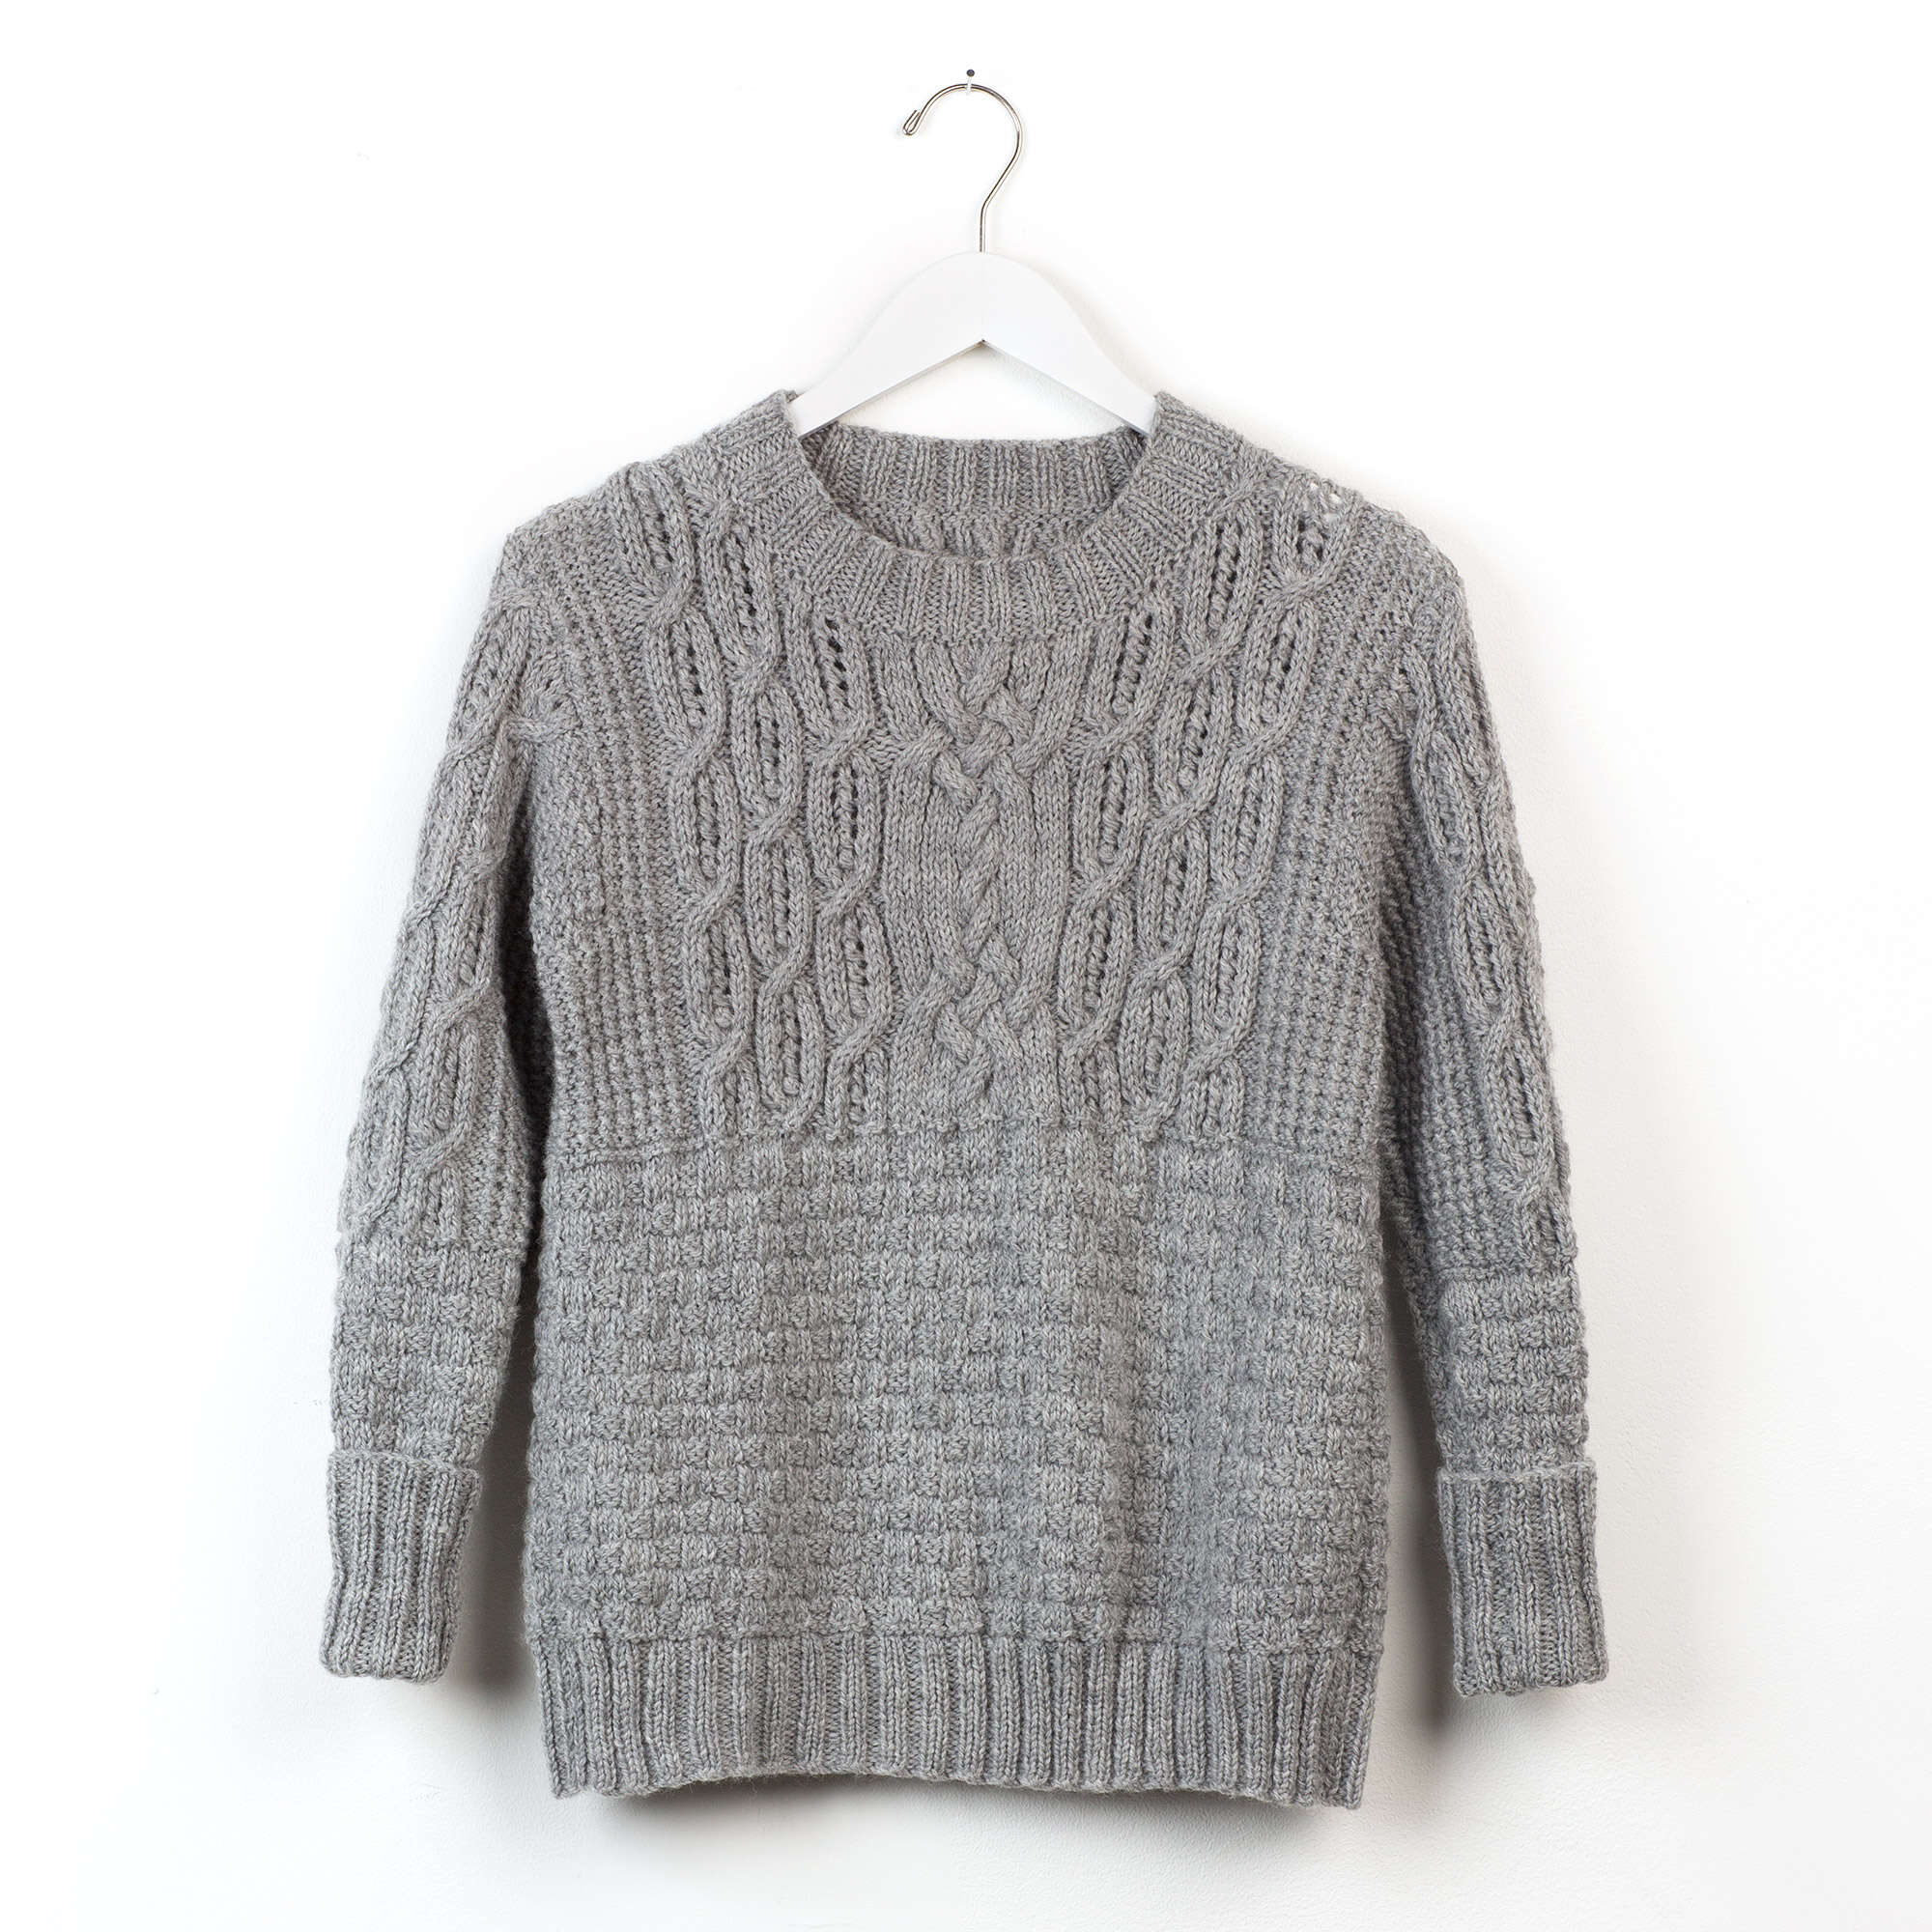 Free Patons Boxy Cabled Crew Knit Pullover Pattern | Yarnspirations